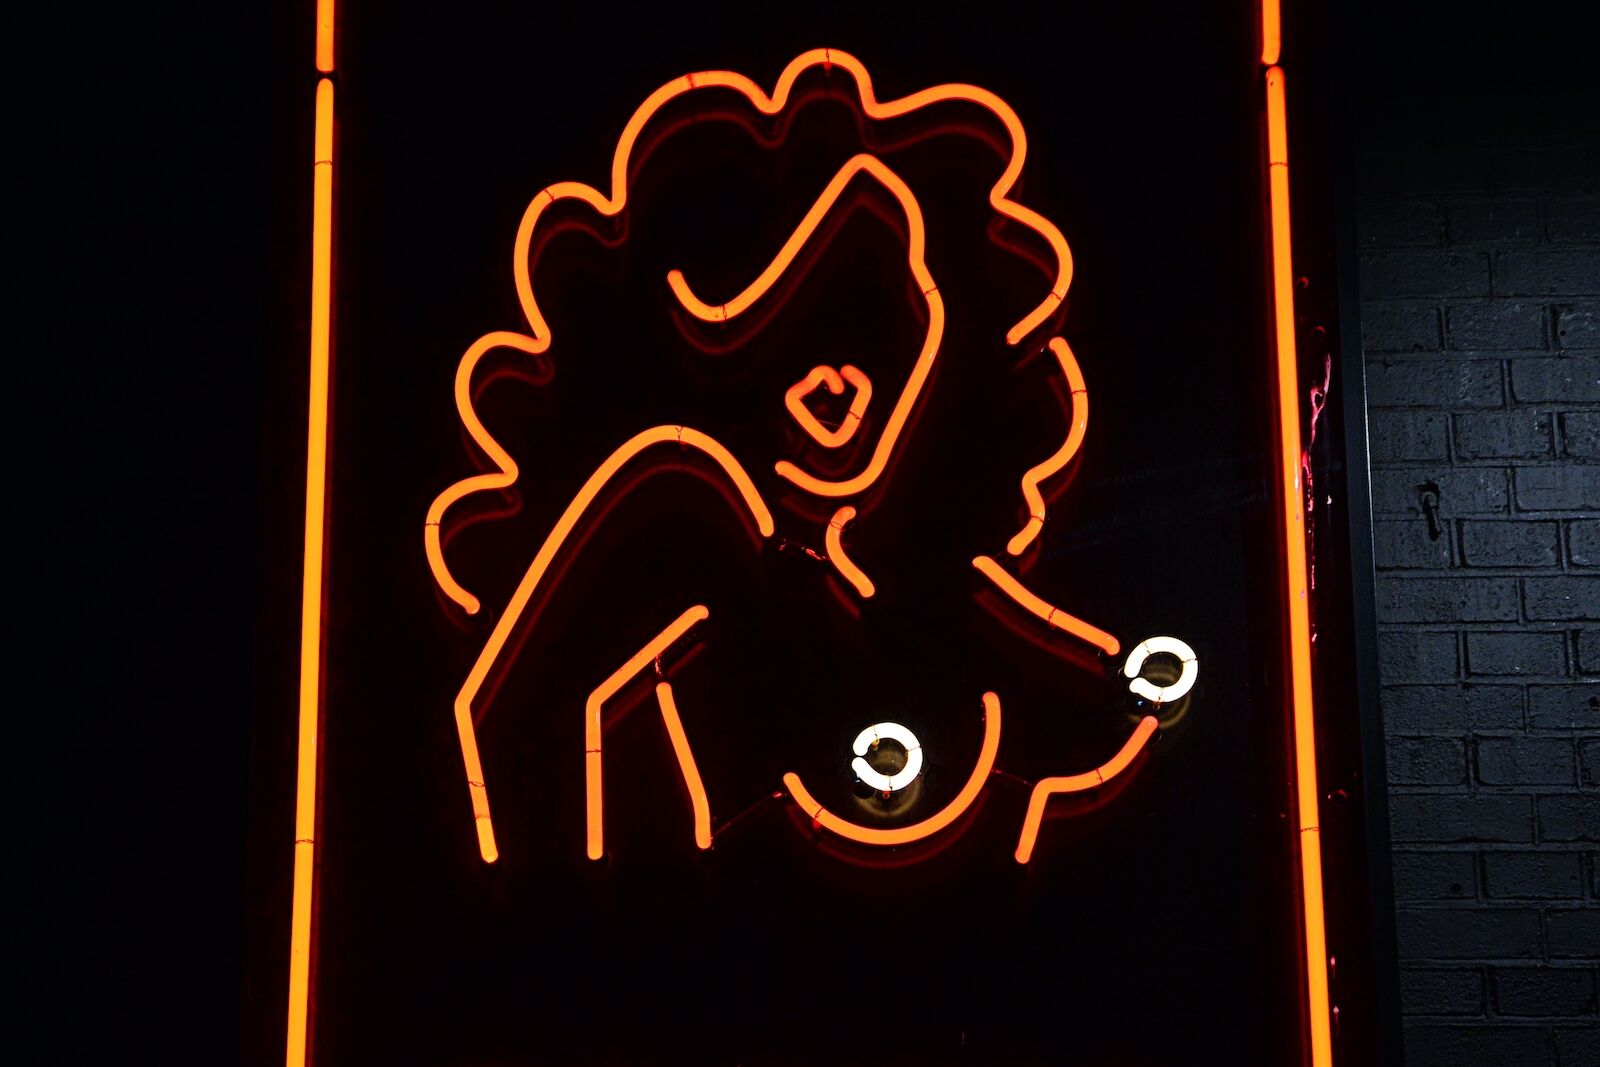 Sexy lights at one of the sex show venues in Amsterdam